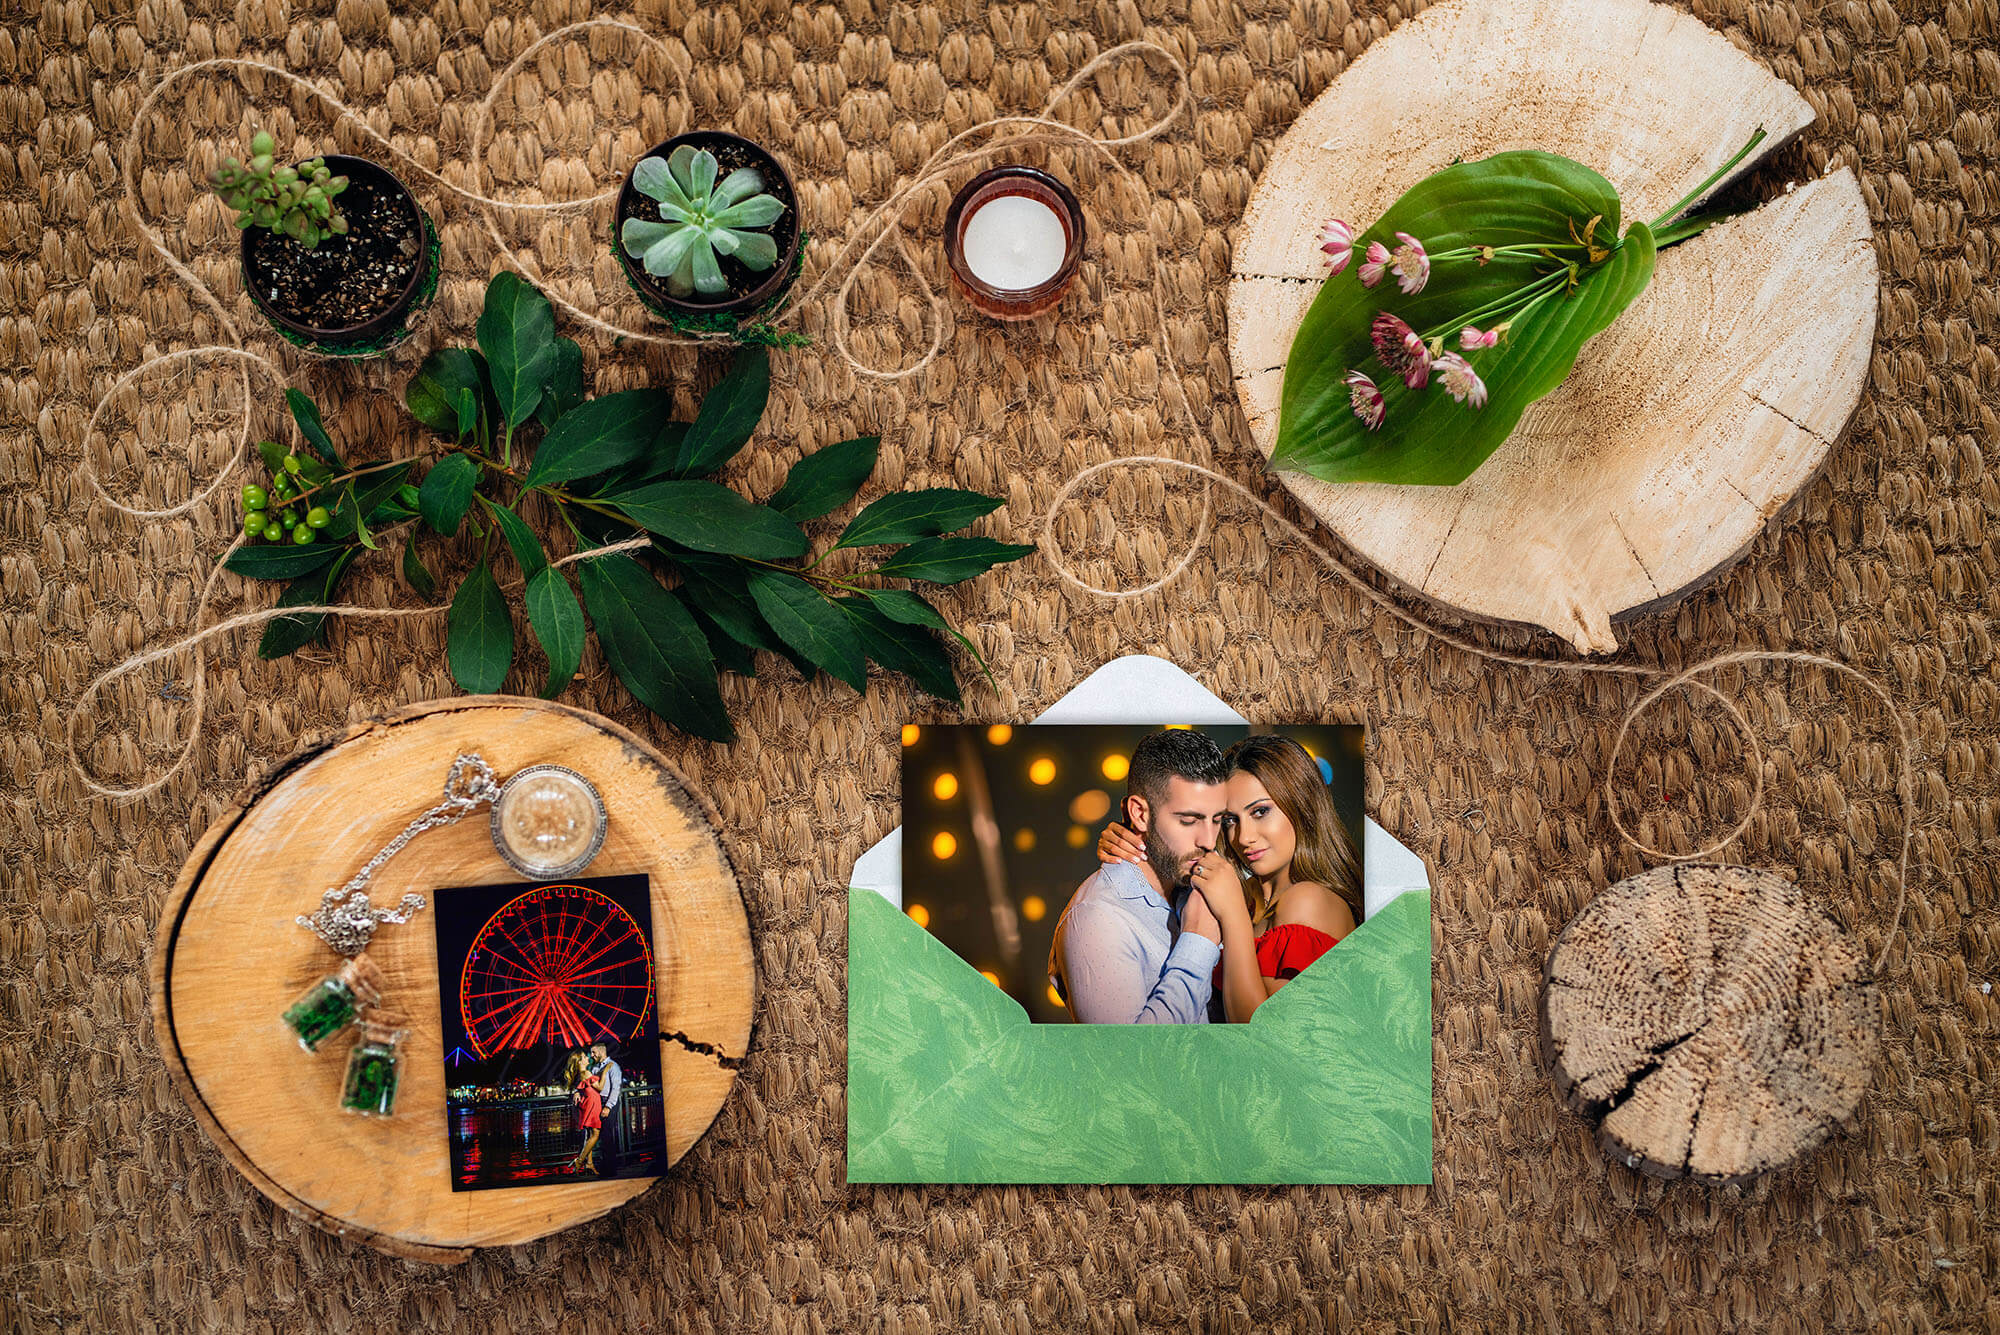 How to incorporate engagement photos into your wedding day